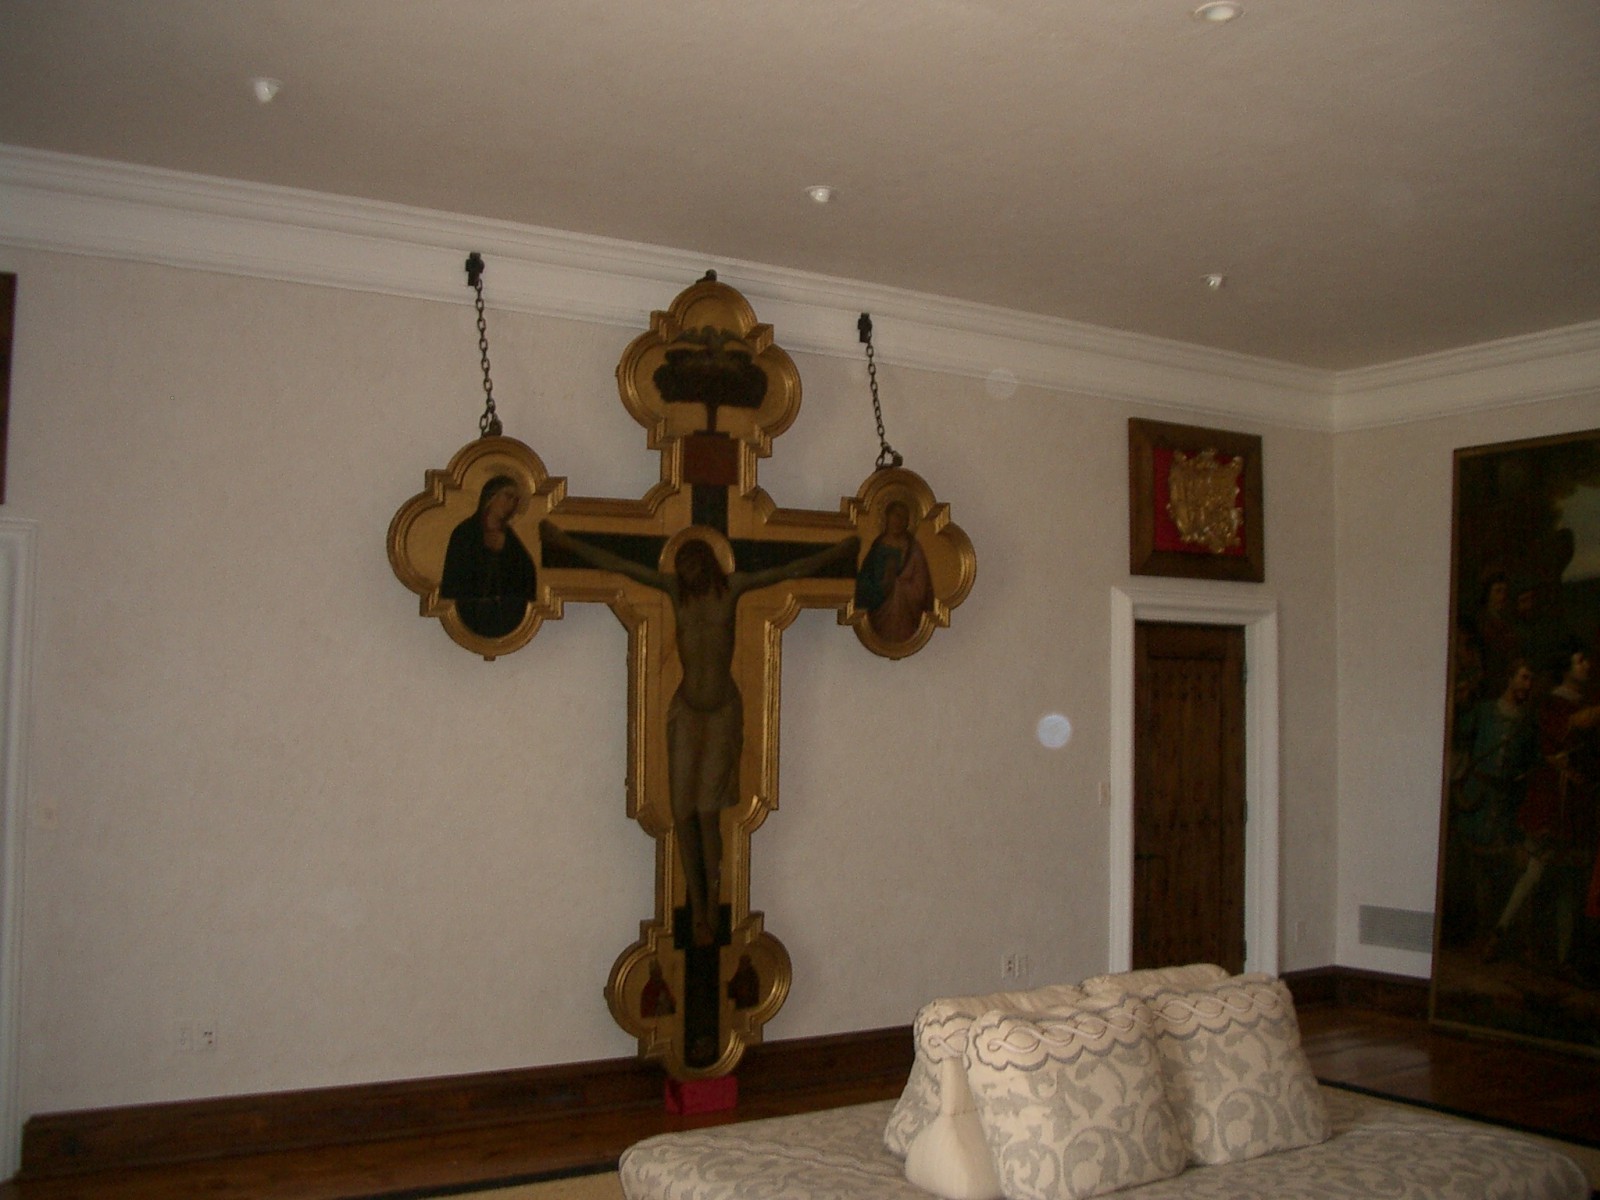  In one bedroom there is a sculpture of a life-sized Jesus crucified on a golden cross